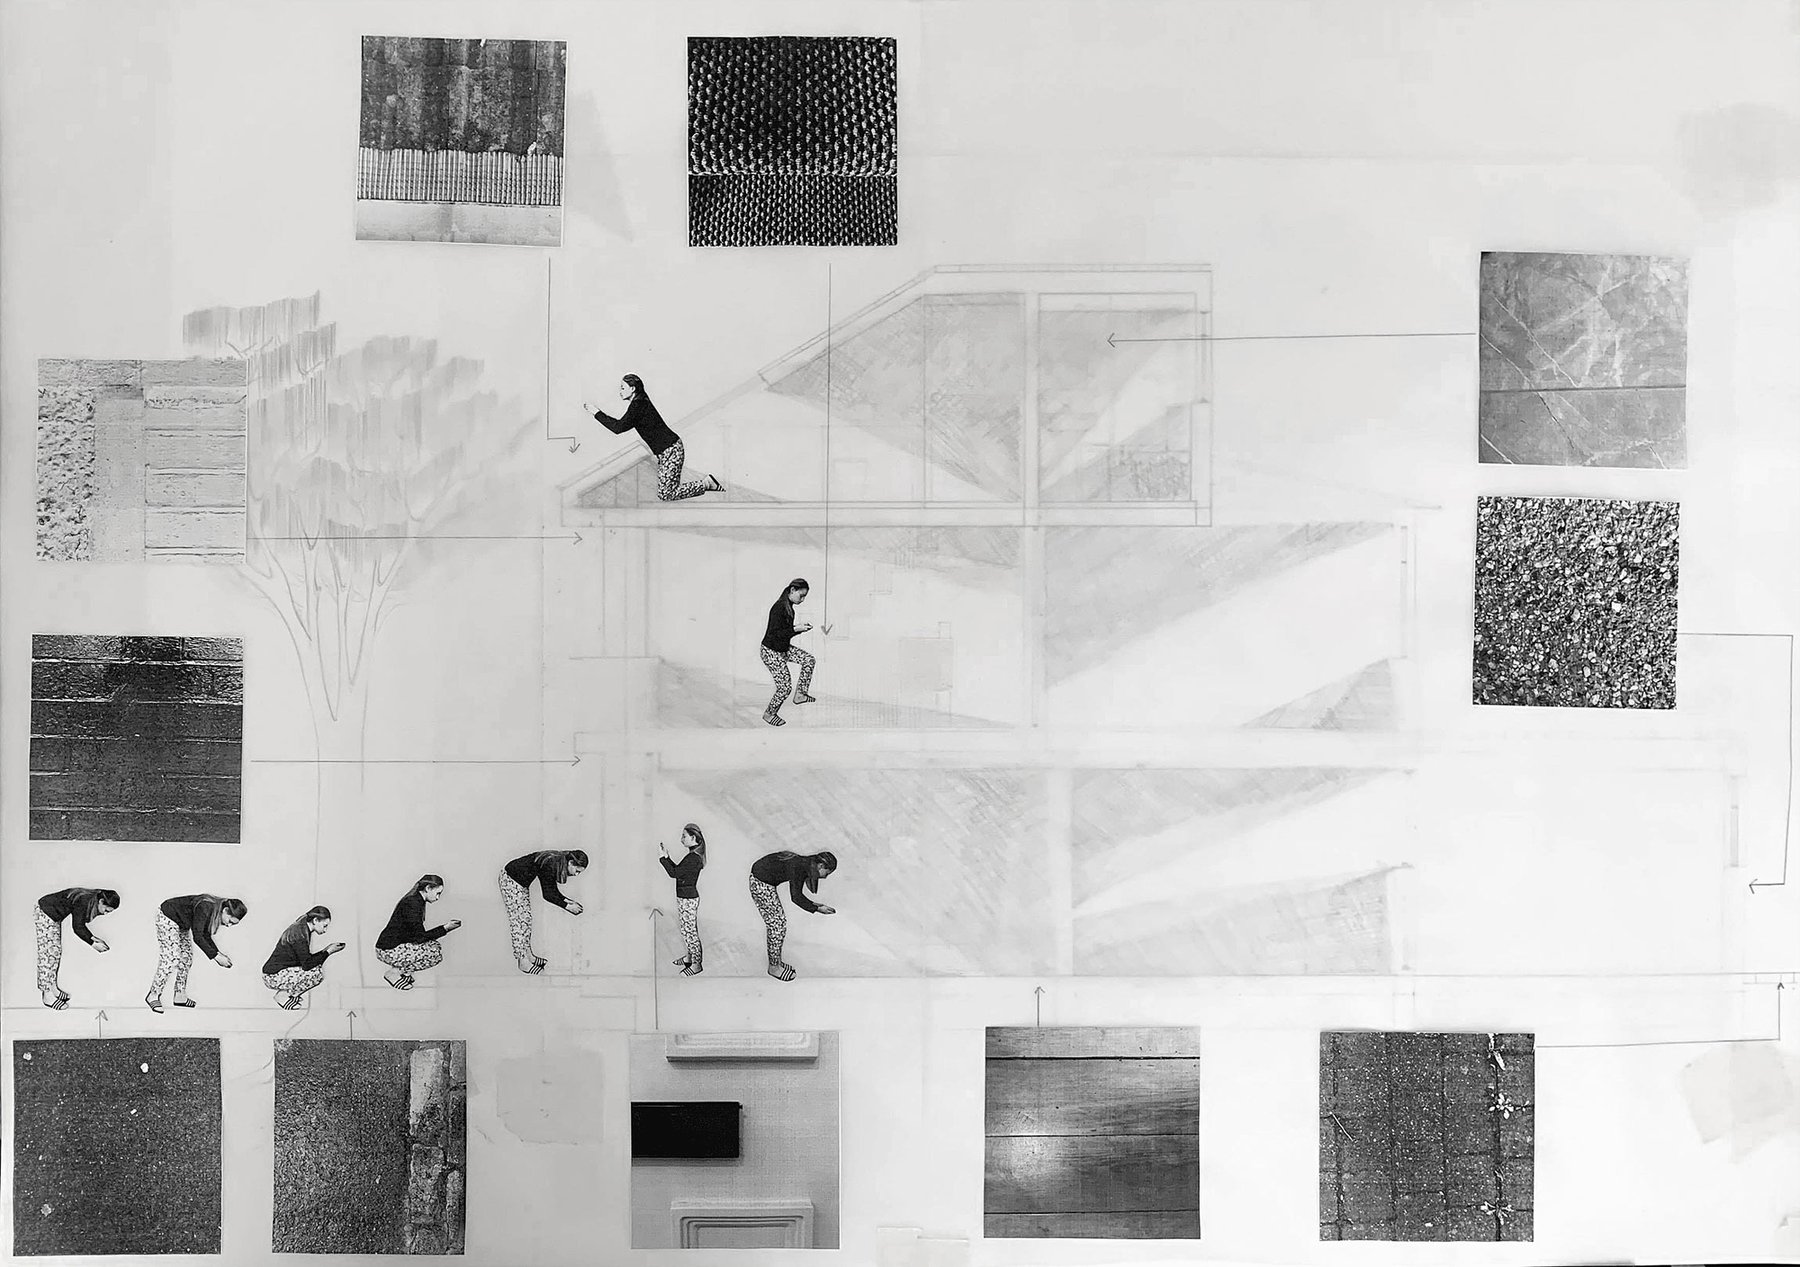 A composite drawing which is a section through a house with 2 levels. A small person is collaged in multiple places in the drawing to suggest their movement through the space. The small person is seen inspecting the floor